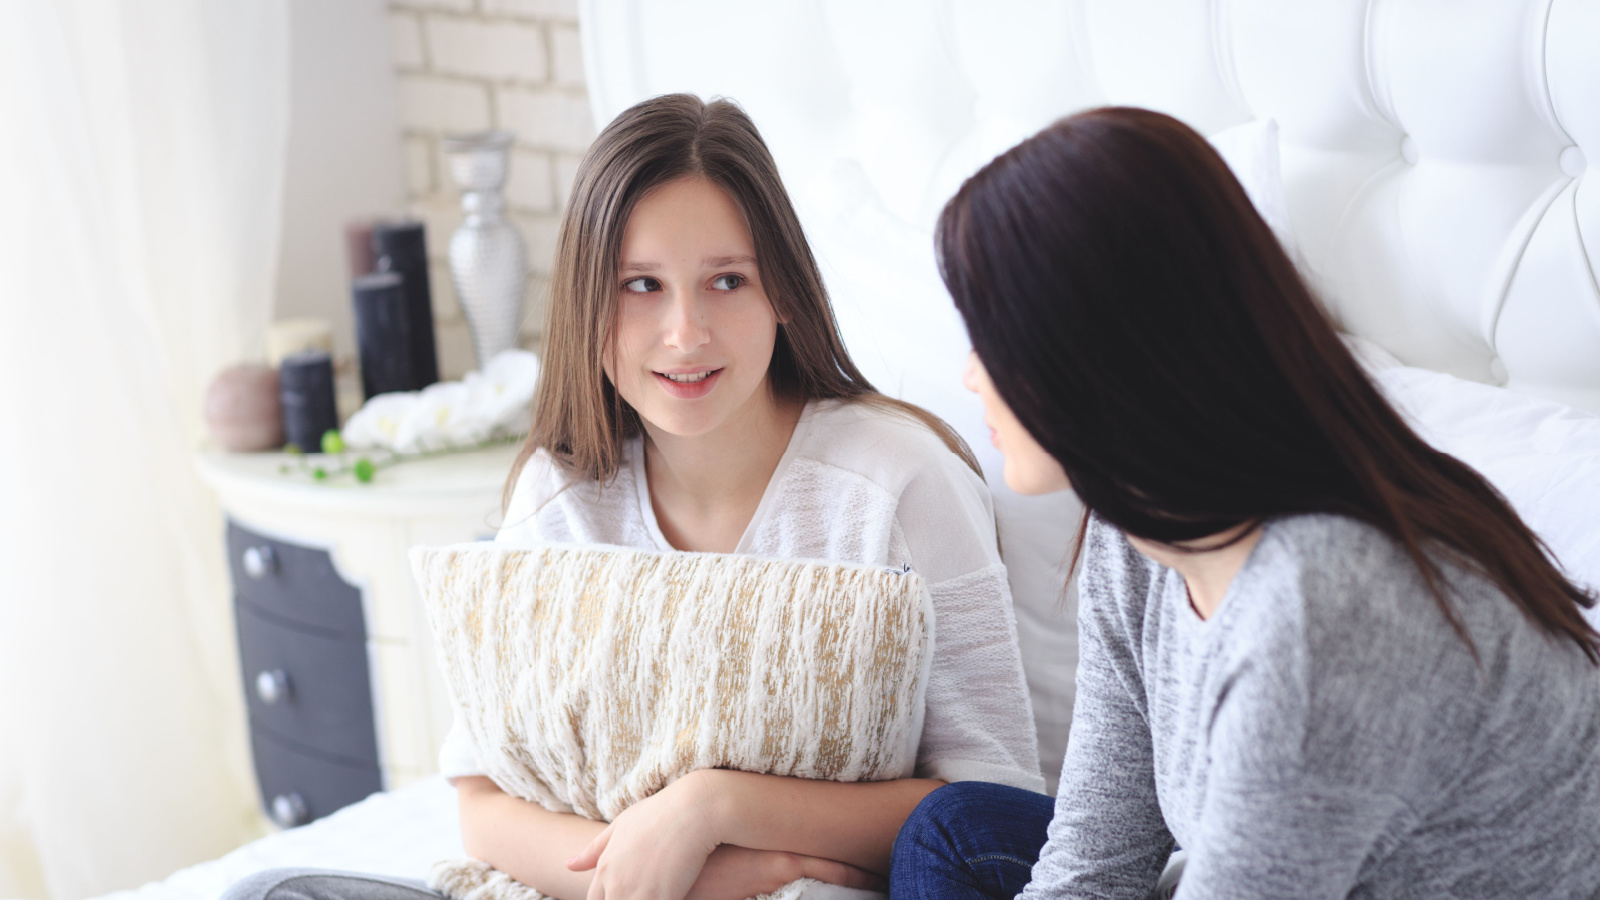 image credit: Olimpik/Shutterstock <p><span>Be a listening ear for your teen. Allow them to express their fears and anxieties without judgment. Offer reassurance and remind them that their worth is not defined by college admissions.</span></p>